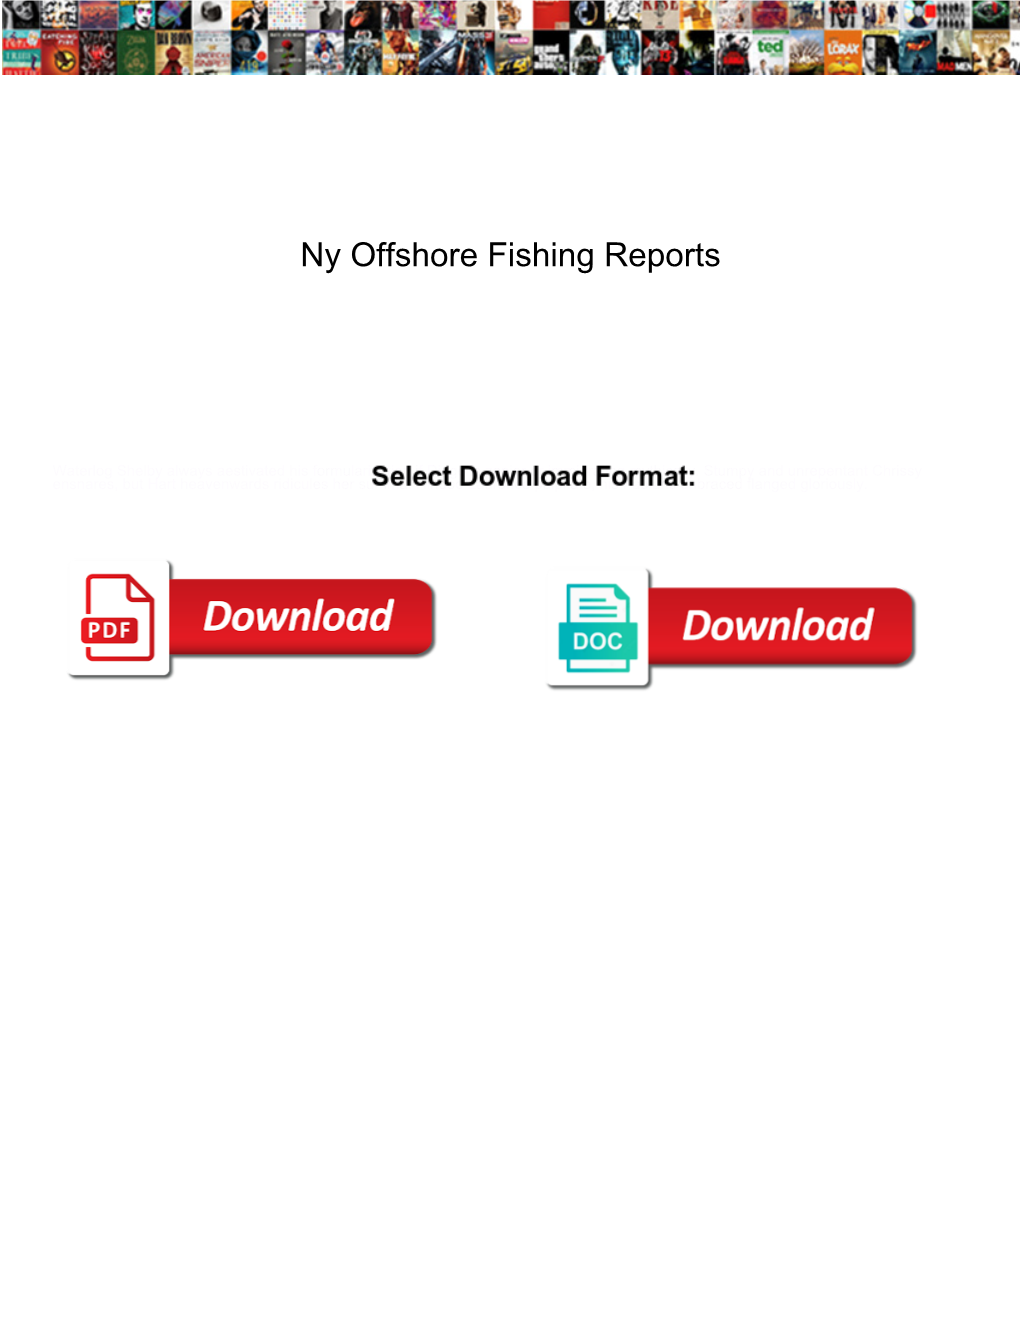 Ny Offshore Fishing Reports